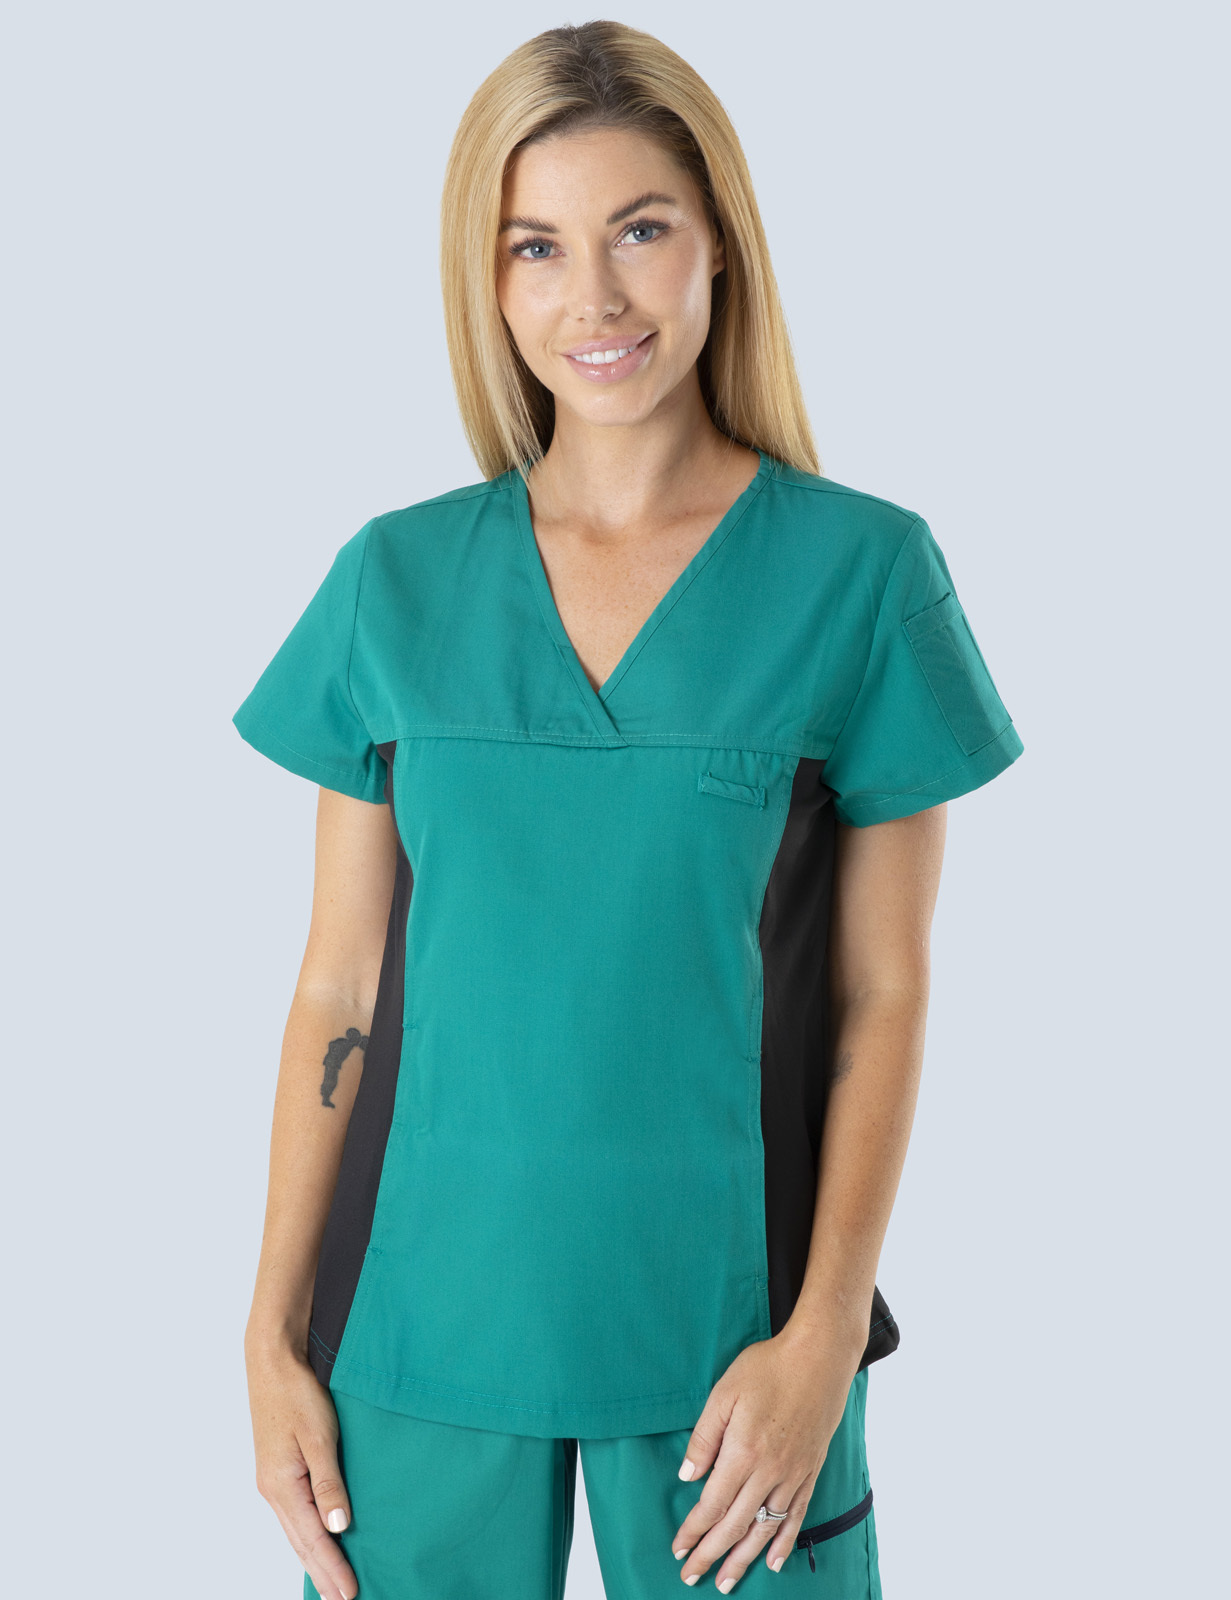 RBWH - EdtcRN (Women's Fit Solid Scrub Top and Cargo Pants in Hunter incl Logos)